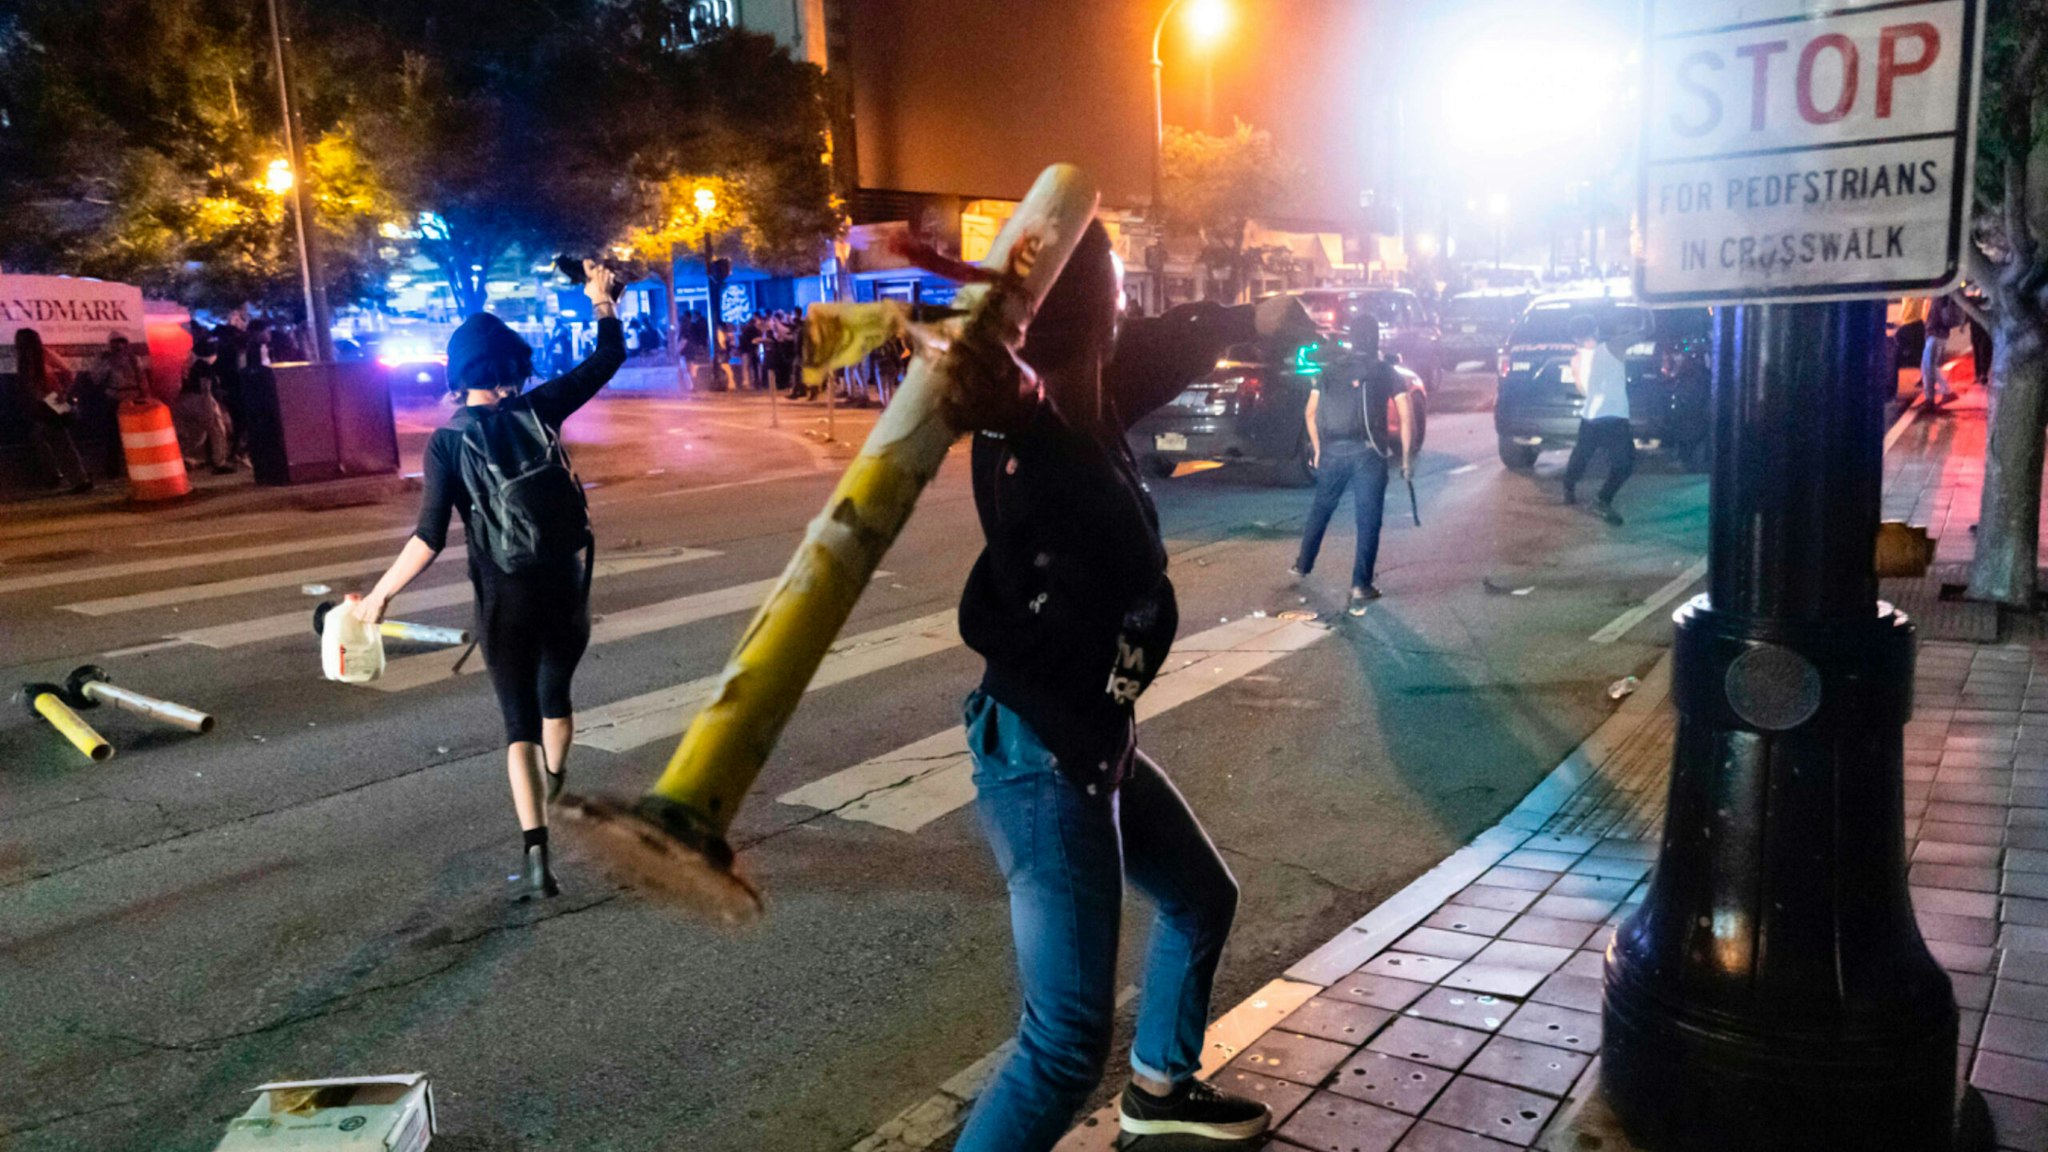 Protesters face off with police during rioting and protests in Atlanta on May 29, 2020. - The death of George Floyd on May 25 while under police custody has sparked violent demonstrations across the US.